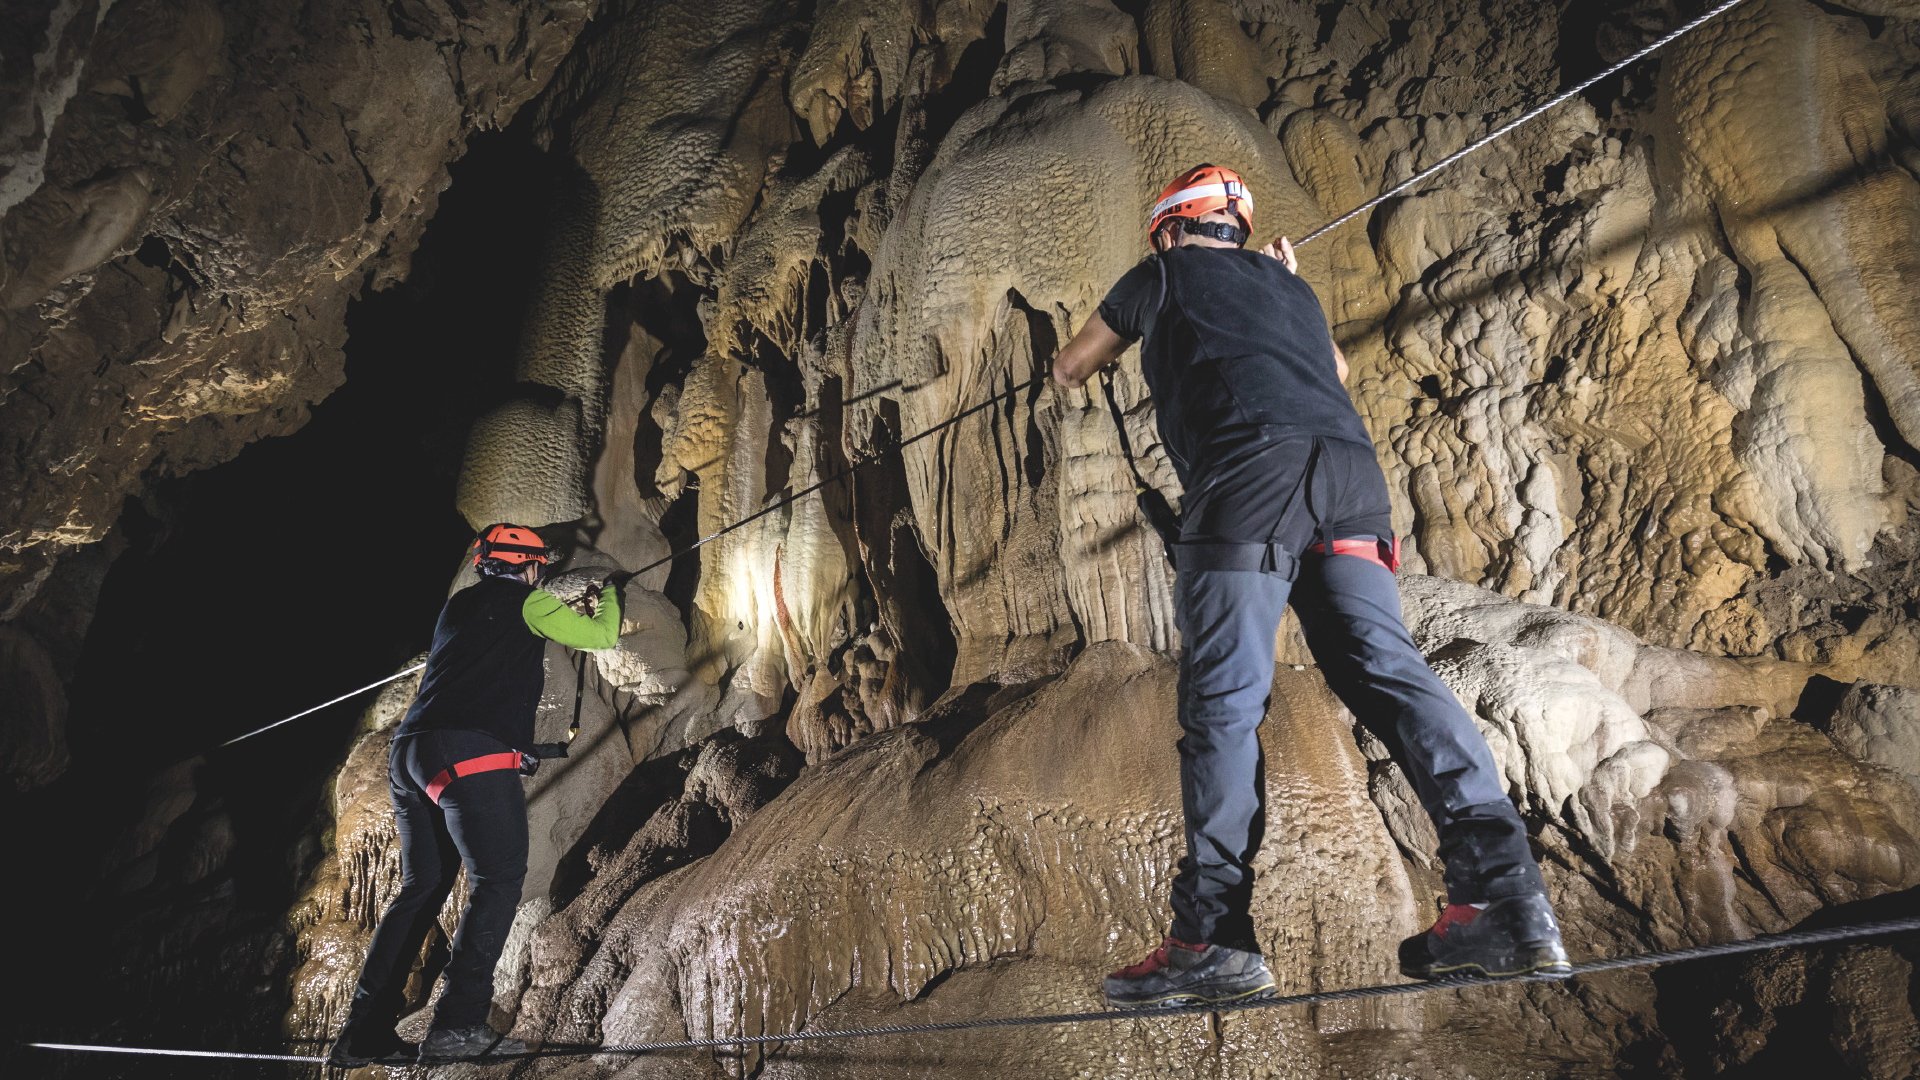 The speleo-adventure, a guided excursion in the beautiful environments of the cave of Equi Terme